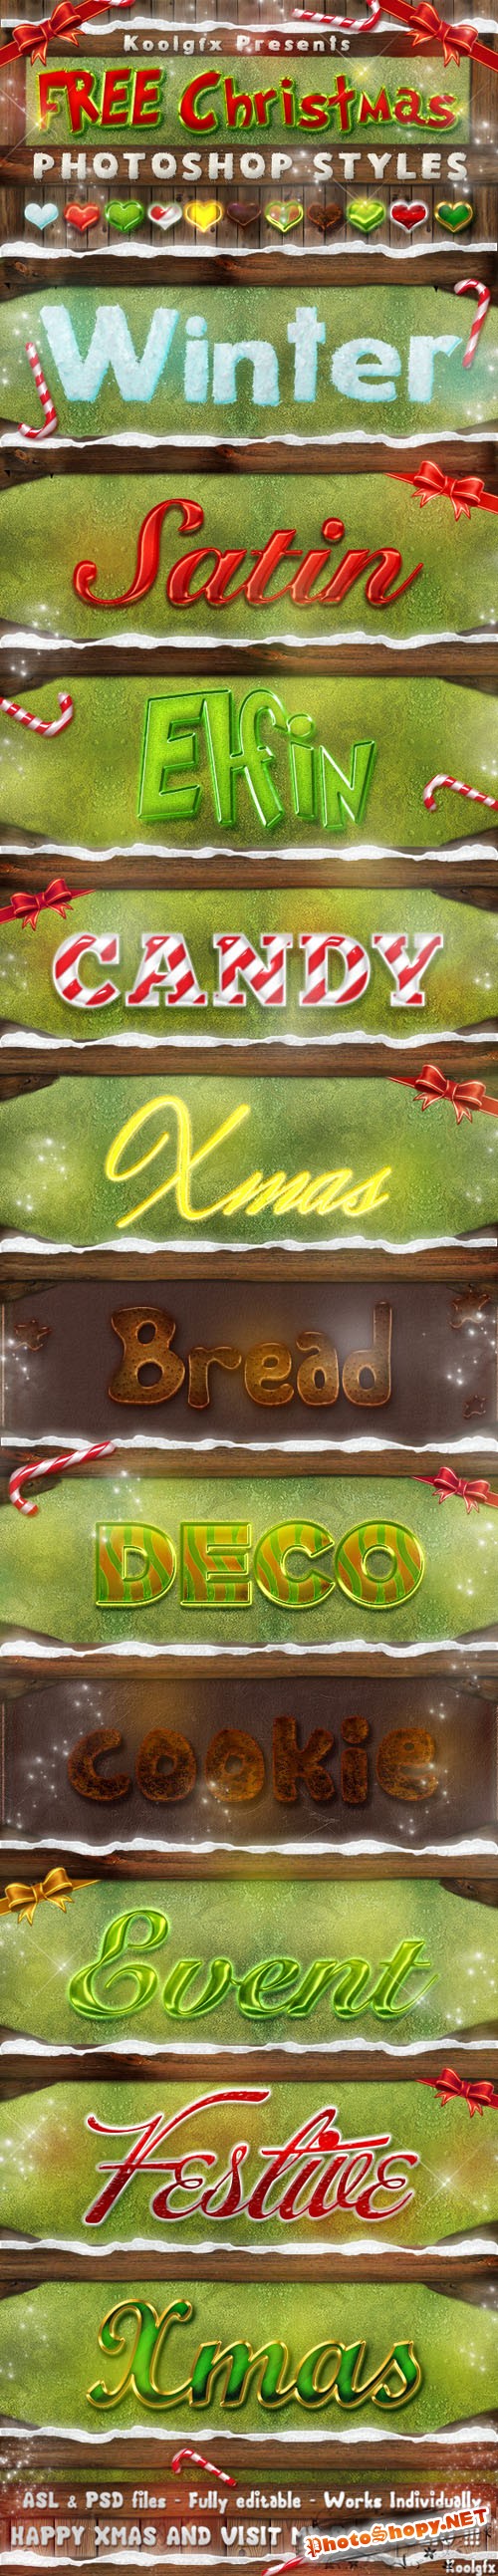 Merry Christmas Text Effect Photoshop Styles